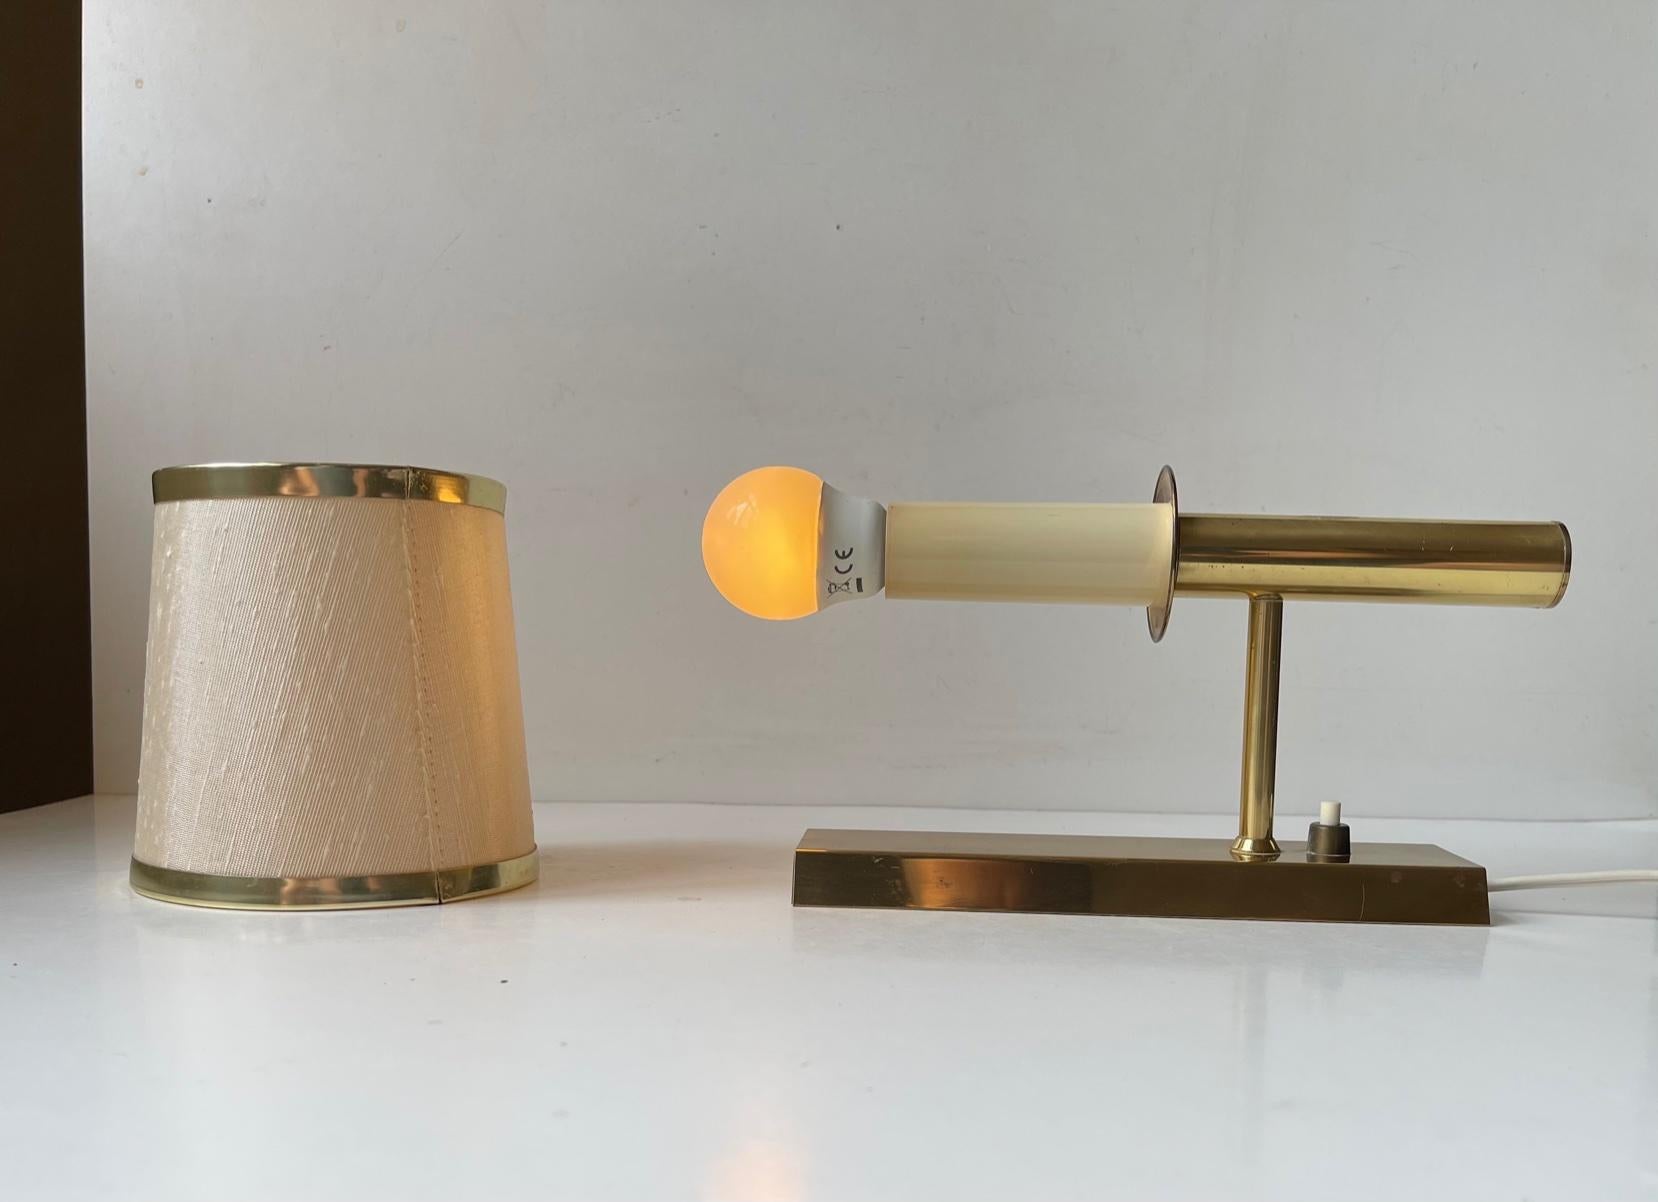 Fixed wall light designed and manufactured by Svend Mejlstrøm in Denmark during the 1960s or early 70s. Its made from polished brass and retains its pastel colored textile shade that came with it originally.